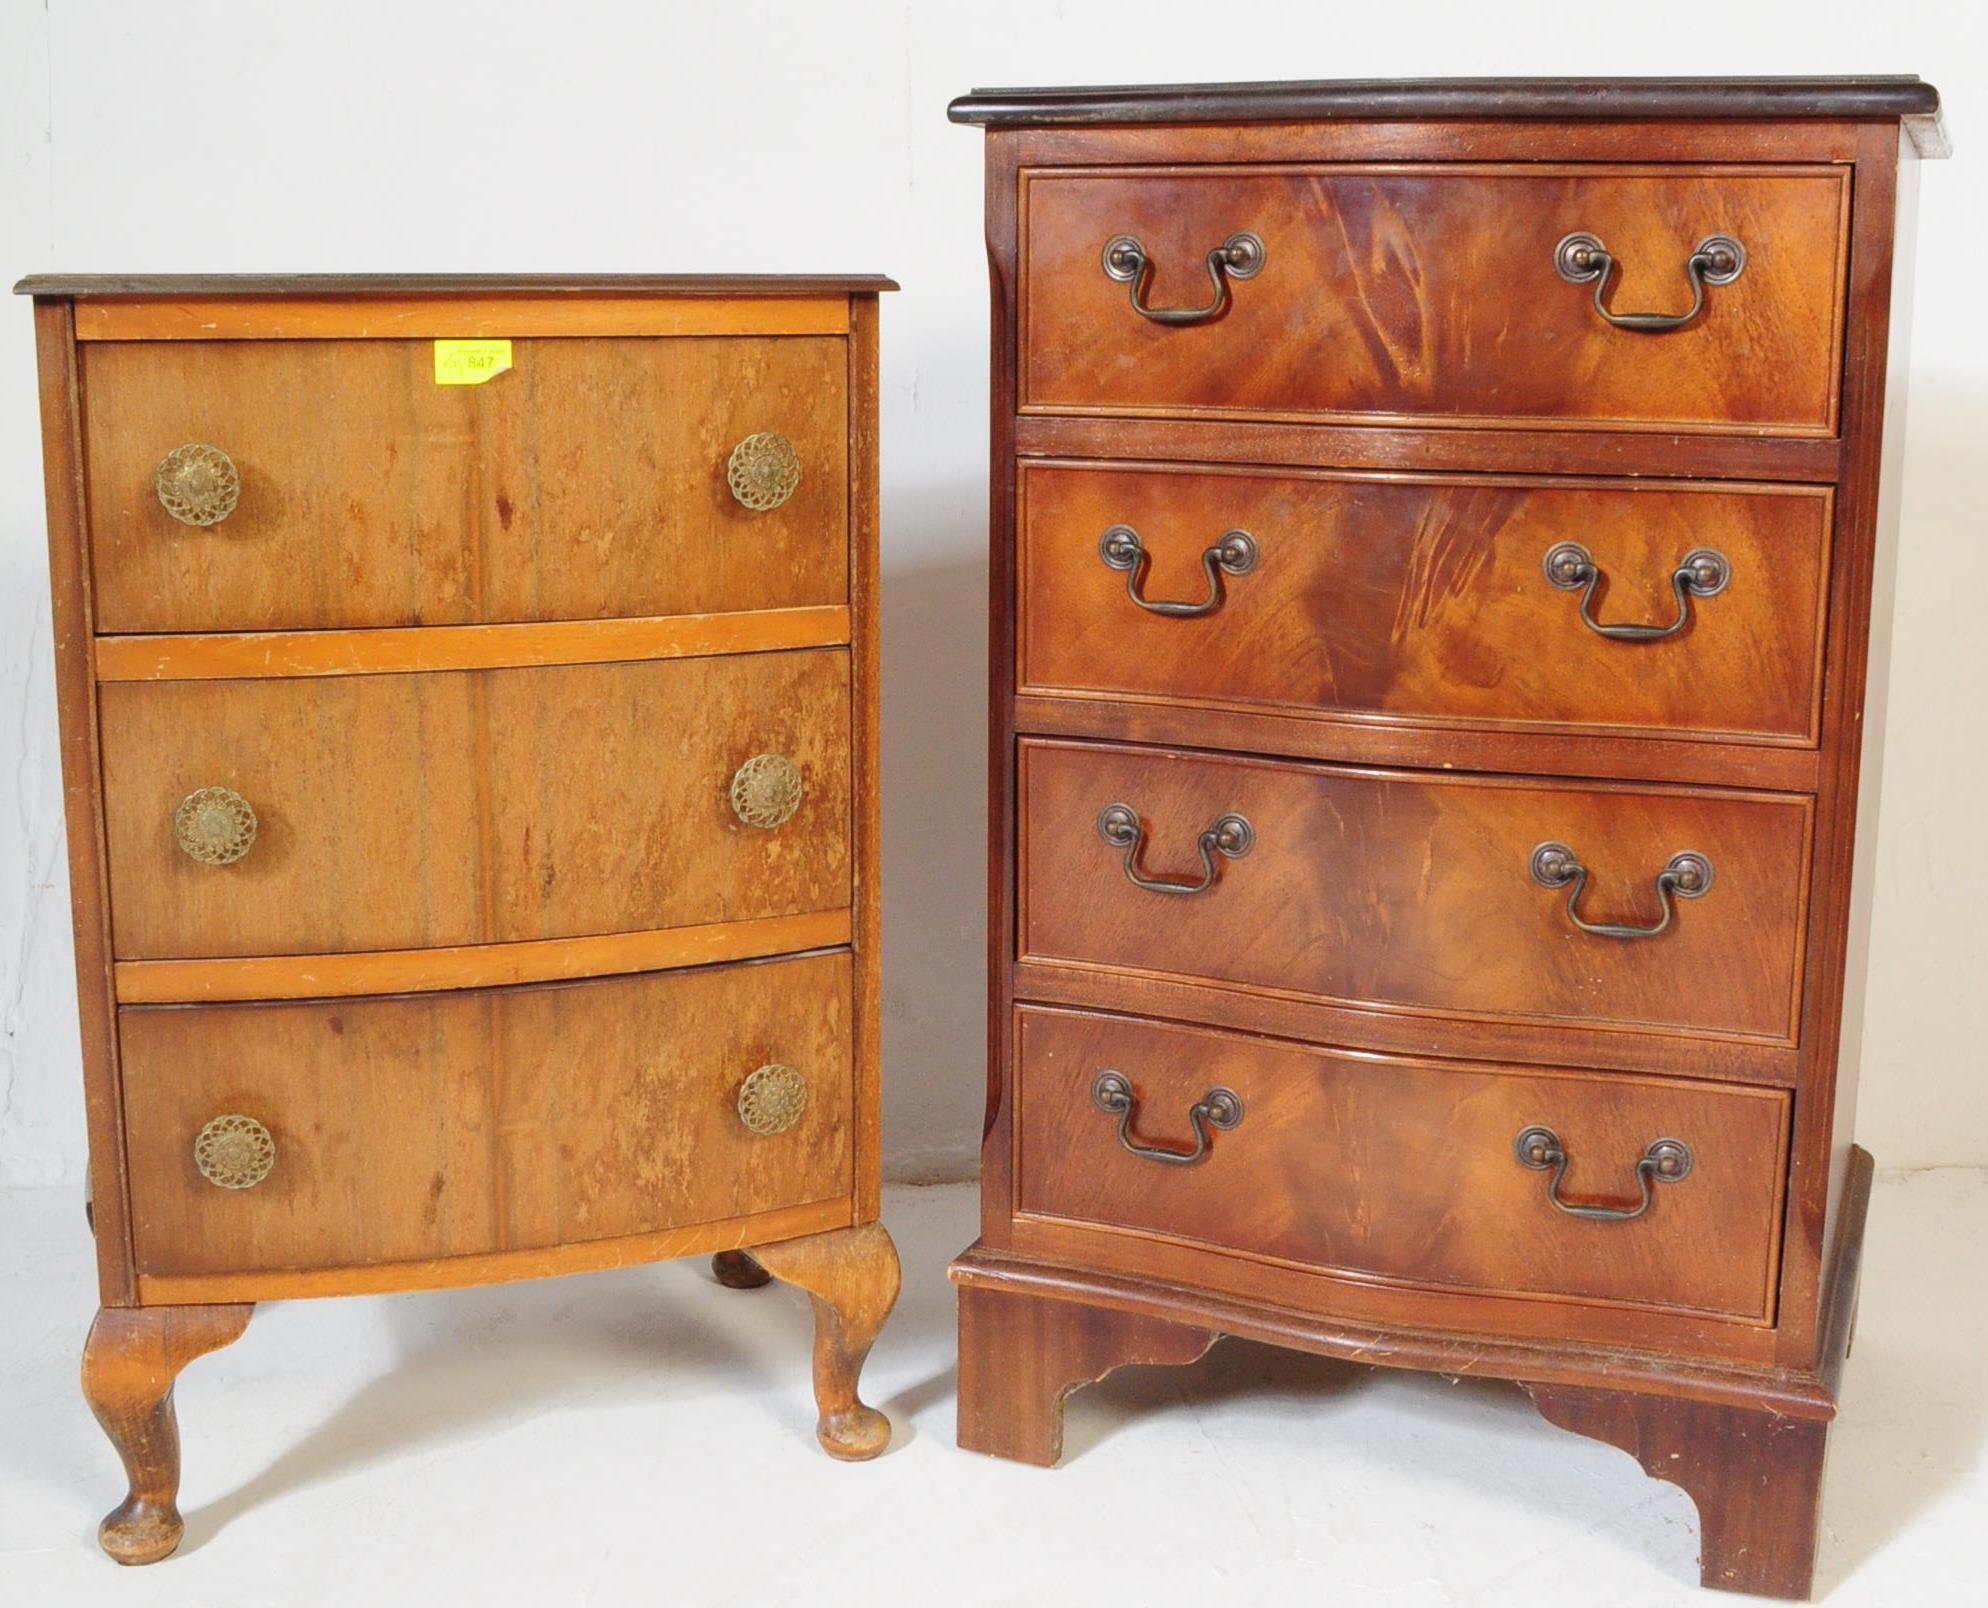 TWO QUEEN ANNE REVIVAL MAHOGANY CHEST OF DRAWERS